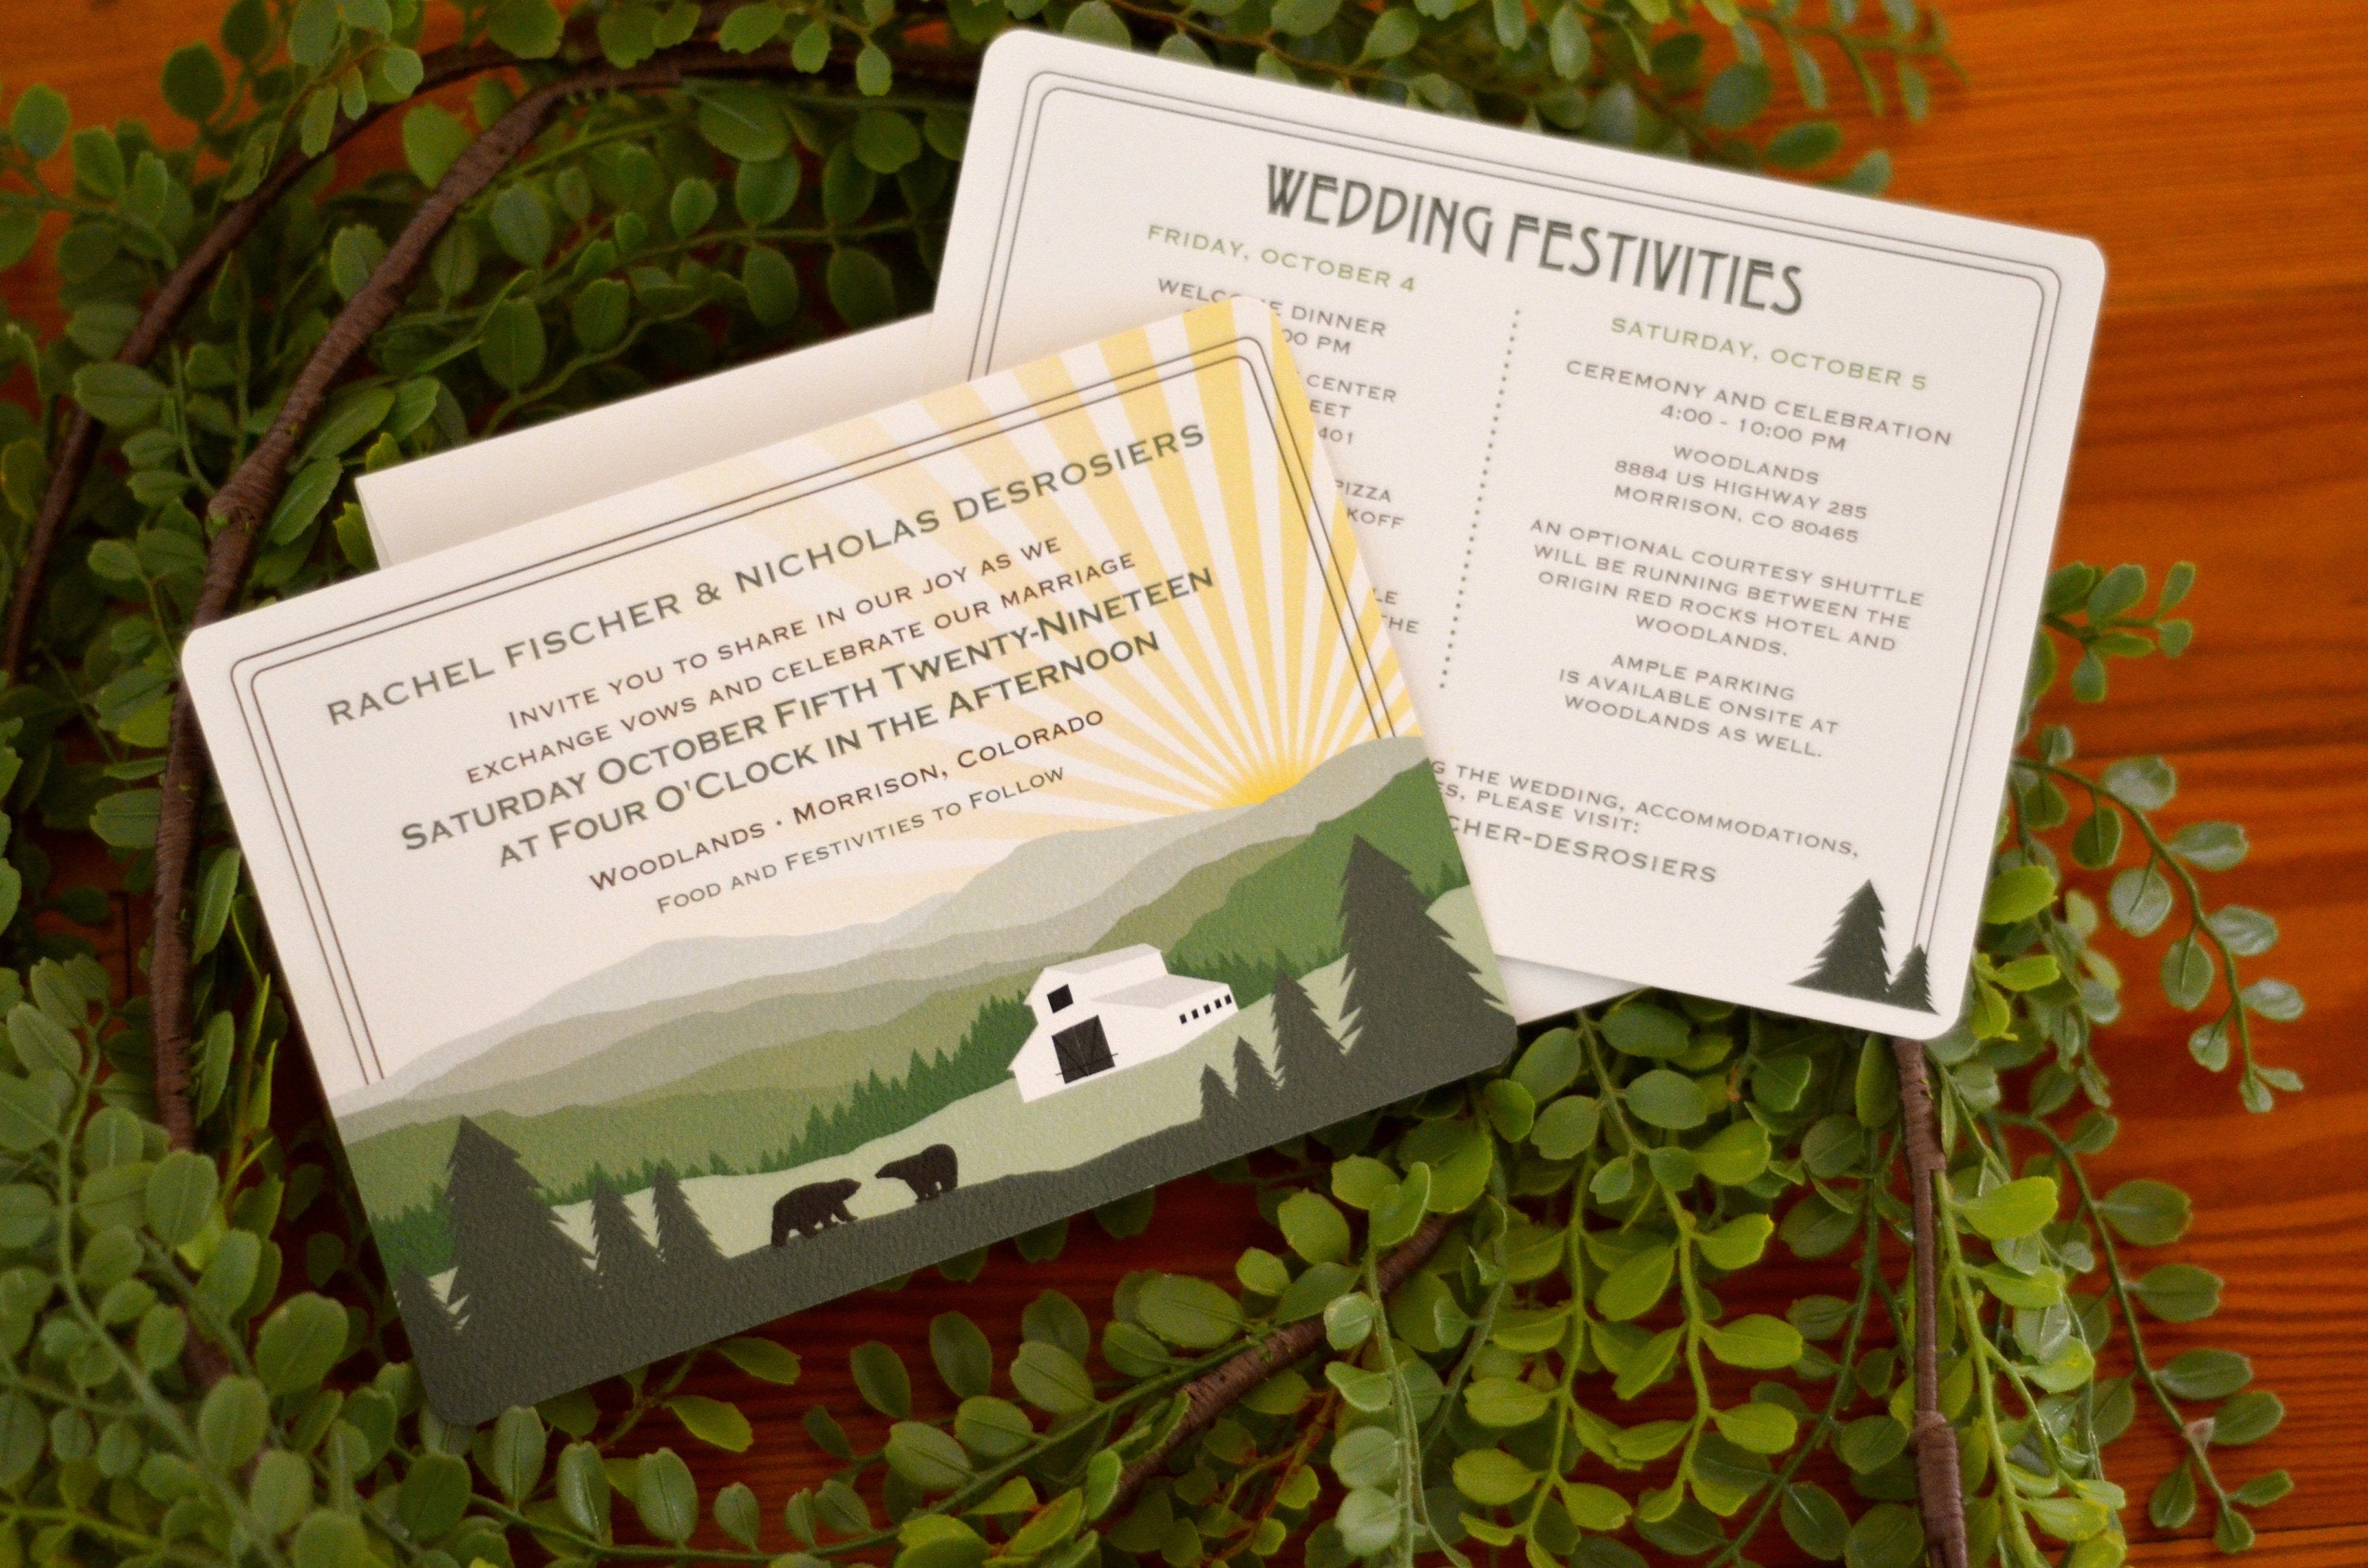 Appalachian Mountains Barn and Bear Landscape with Sunset Wedding Invitation // 5x7 2-sided Wedding Invitation with A7 Envelope